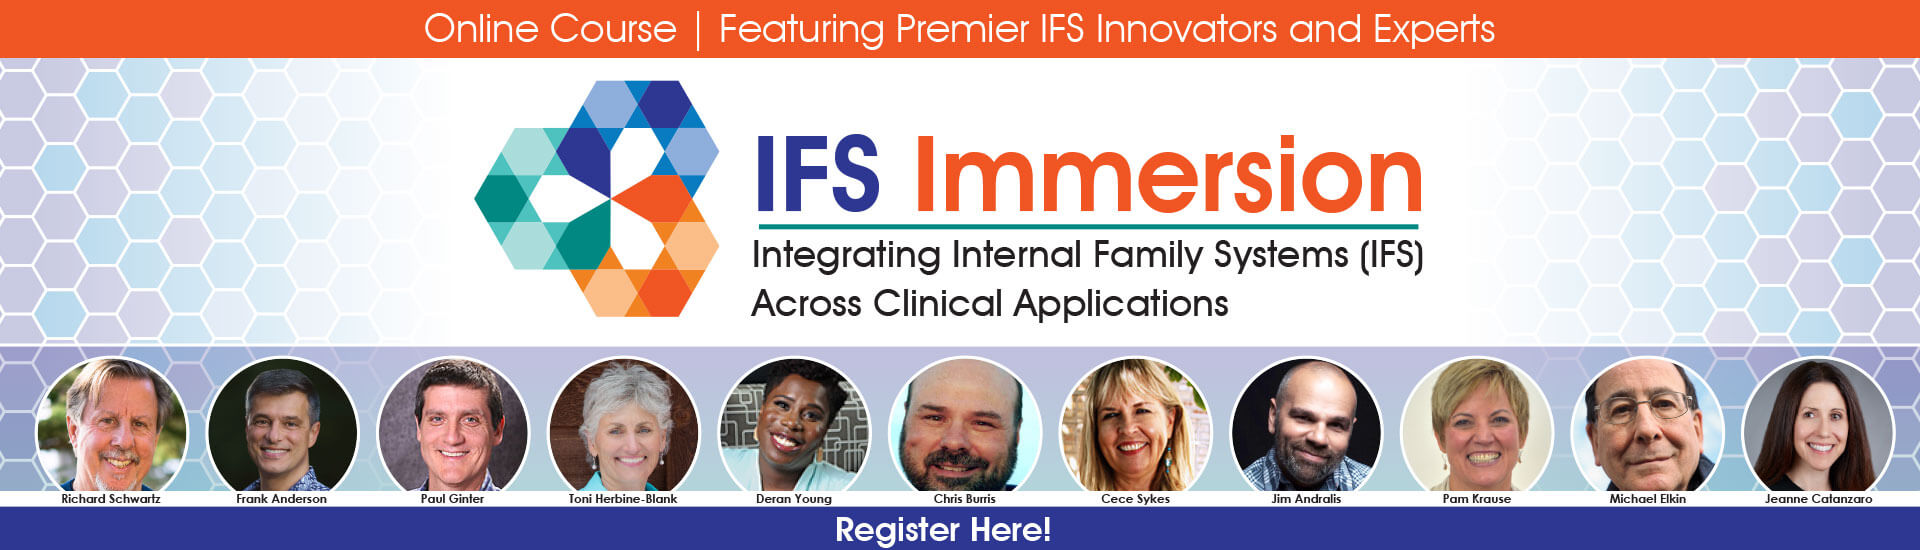 IFS Immersion Integrating Internal Family Systems (IFS) Across Clinical Applications (1)